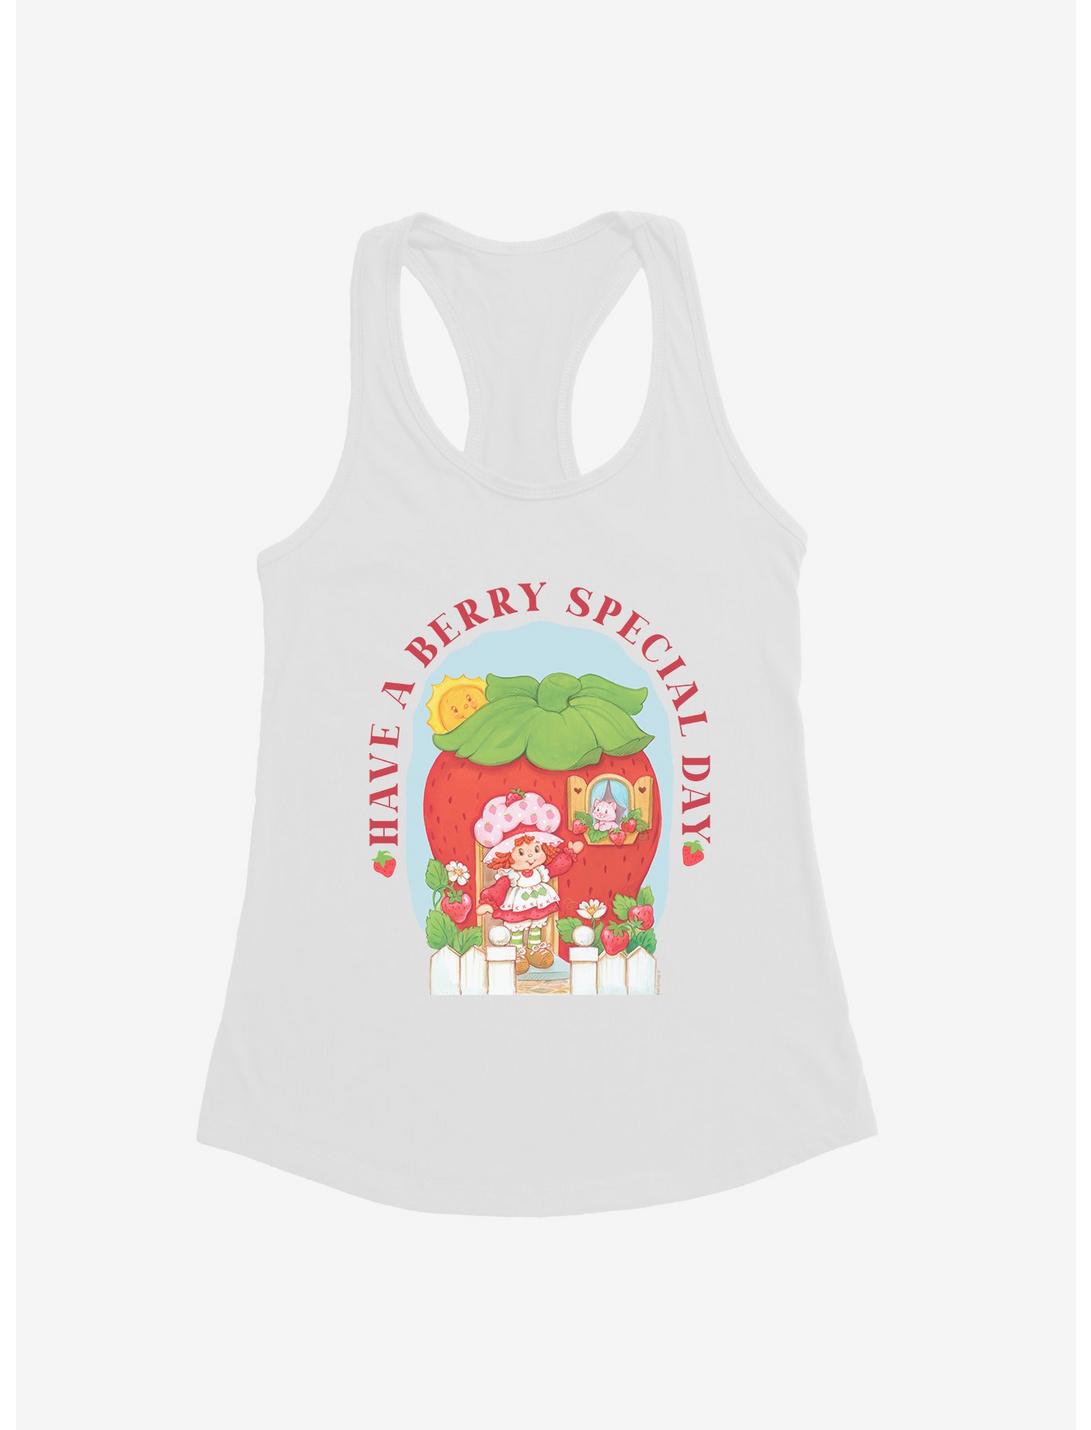 Strawberry Shortcake Berry Special Day Womens Tank Top, WHITE, hi-res